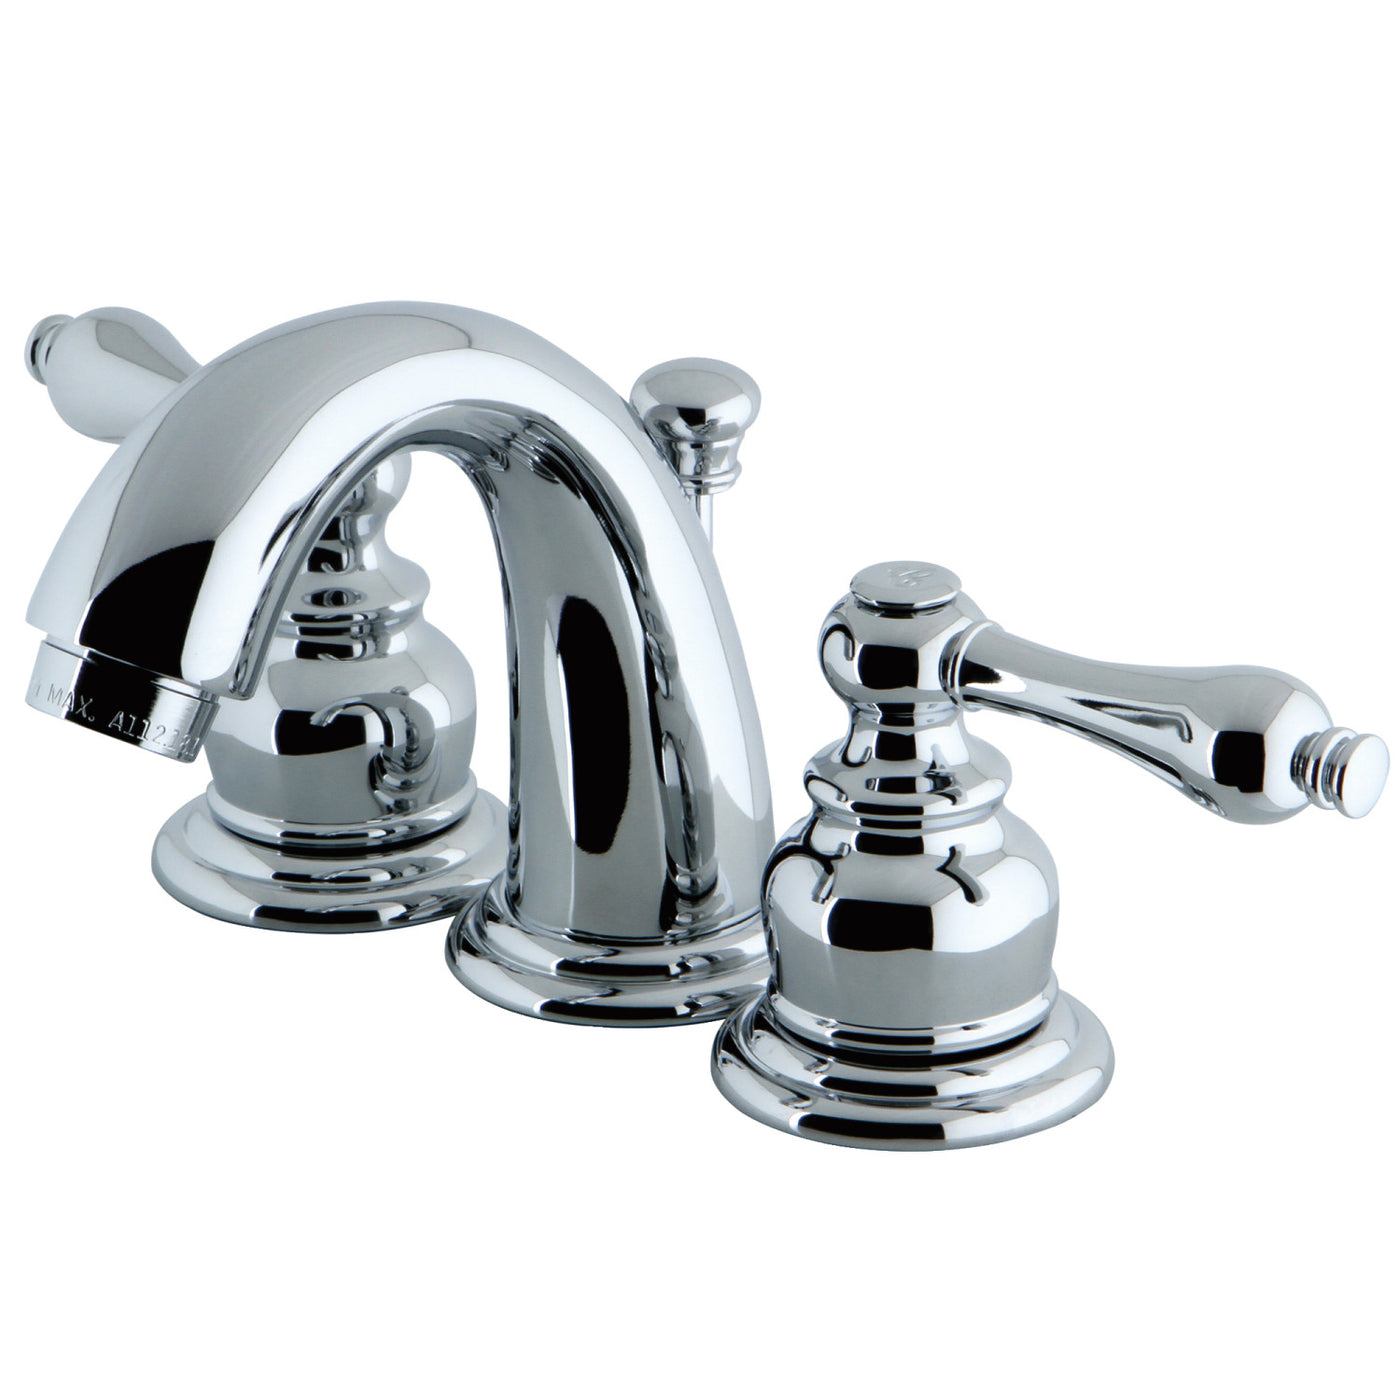 Elements of Design EB911AL Widespread Bathroom Faucet with Retail Pop-Up, Polished Chrome